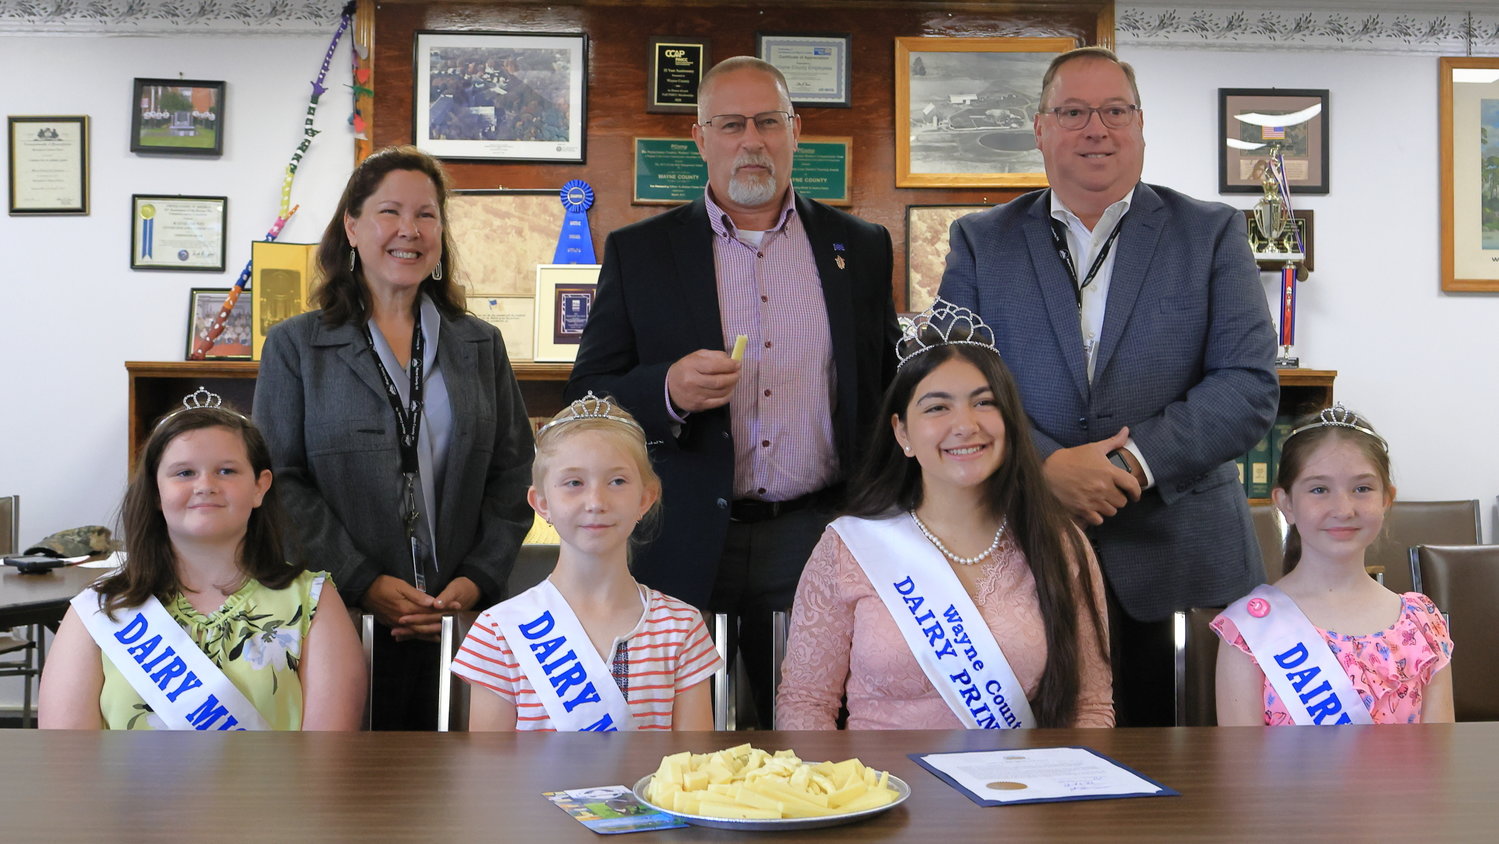 Wayne County Dairy Princess Electra Kahagias and her Court pose with the Wayne County Commissioners after receiving a copy of the Proclamation naming June as Dairy Month and July as Ice Cream Month in Wayne County. Seated from left are Dairy Miss Kenley Roberts, Dairy Miss Chloe Tyler, 2022 Wayne County Dairy Princess Electra Kahagias, Dairy Miss Zoe Tyler; standing from left: Wayne County Commissioners Jocelyn Cramer, Brian Smith and Joseph Adams.